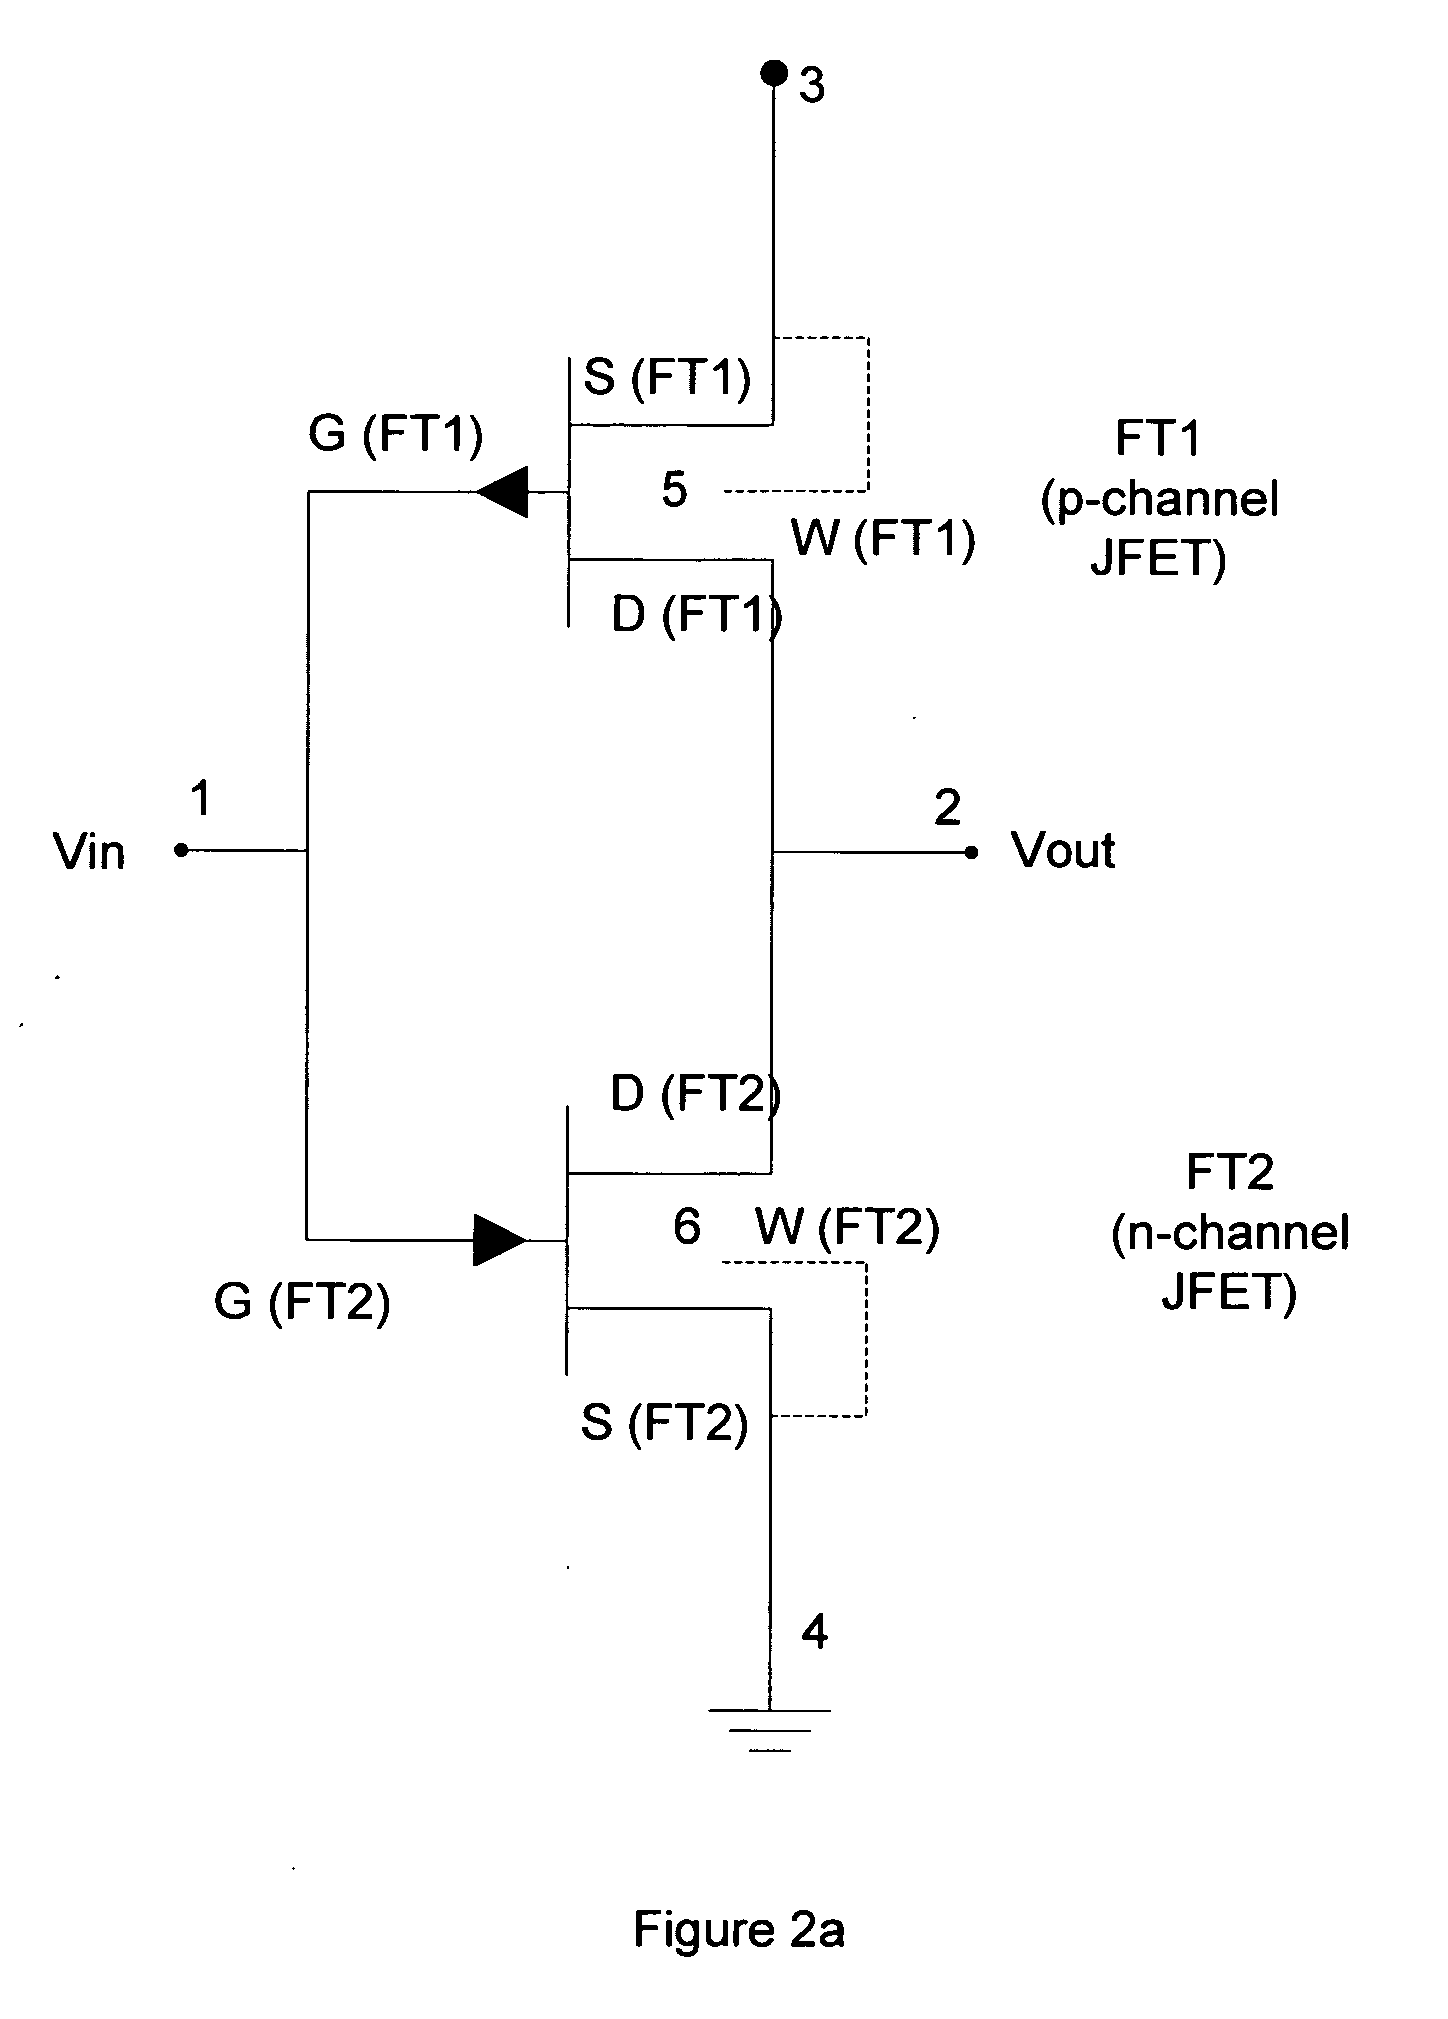 Integrated circuit using complementary junction field effect transistor and MOS transistor in silicon and silicon alloys